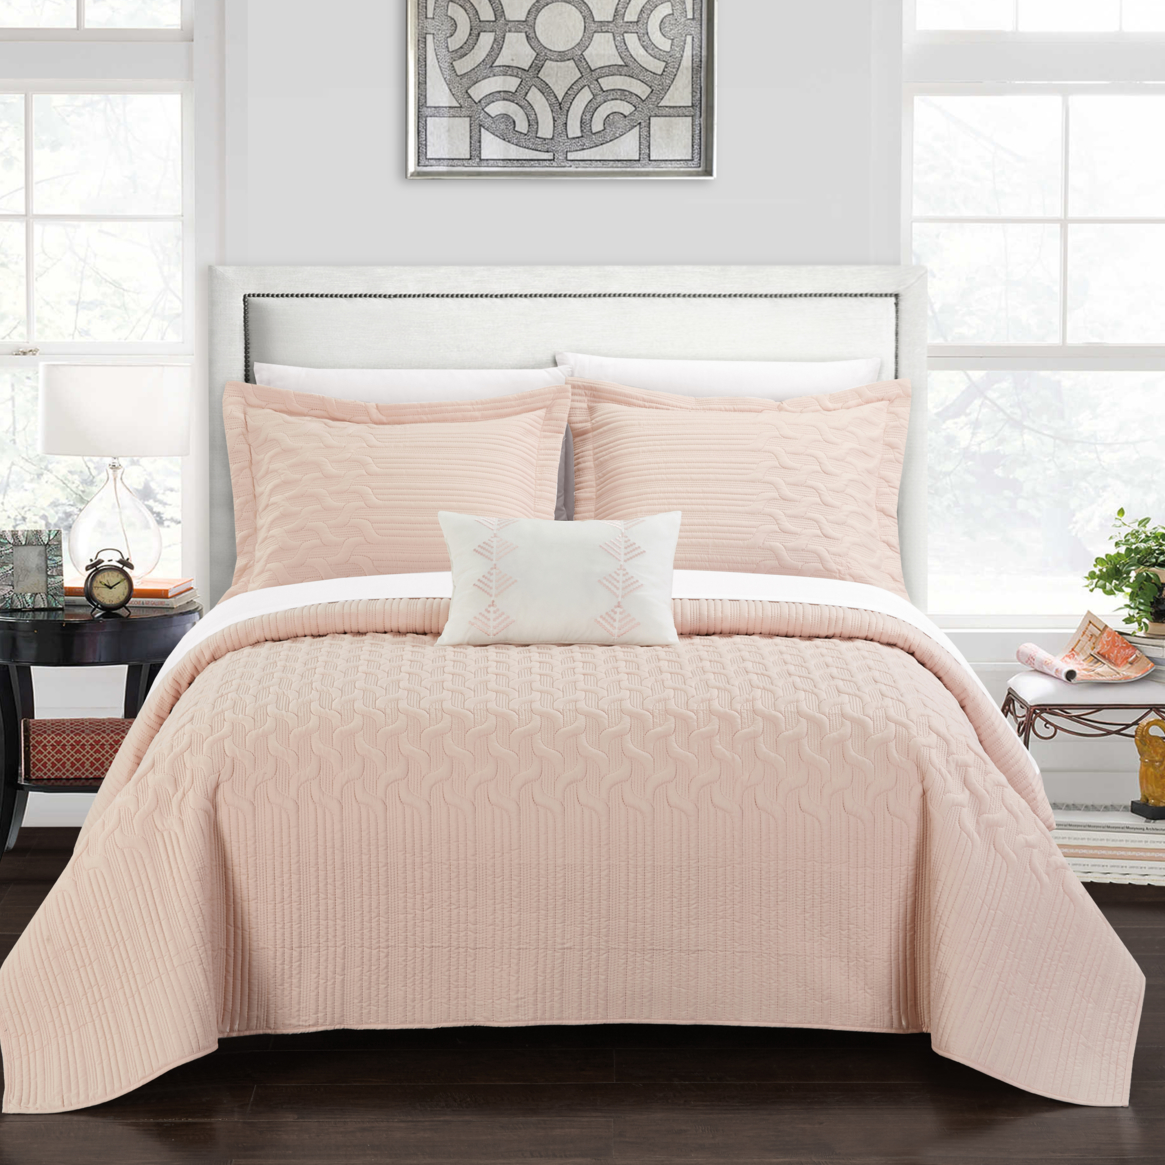 Shaliya 8 Or 6 Piece Quilt Cover Set Interlaced Vine Pattern Quilted Bed In A Bag - Blush, King